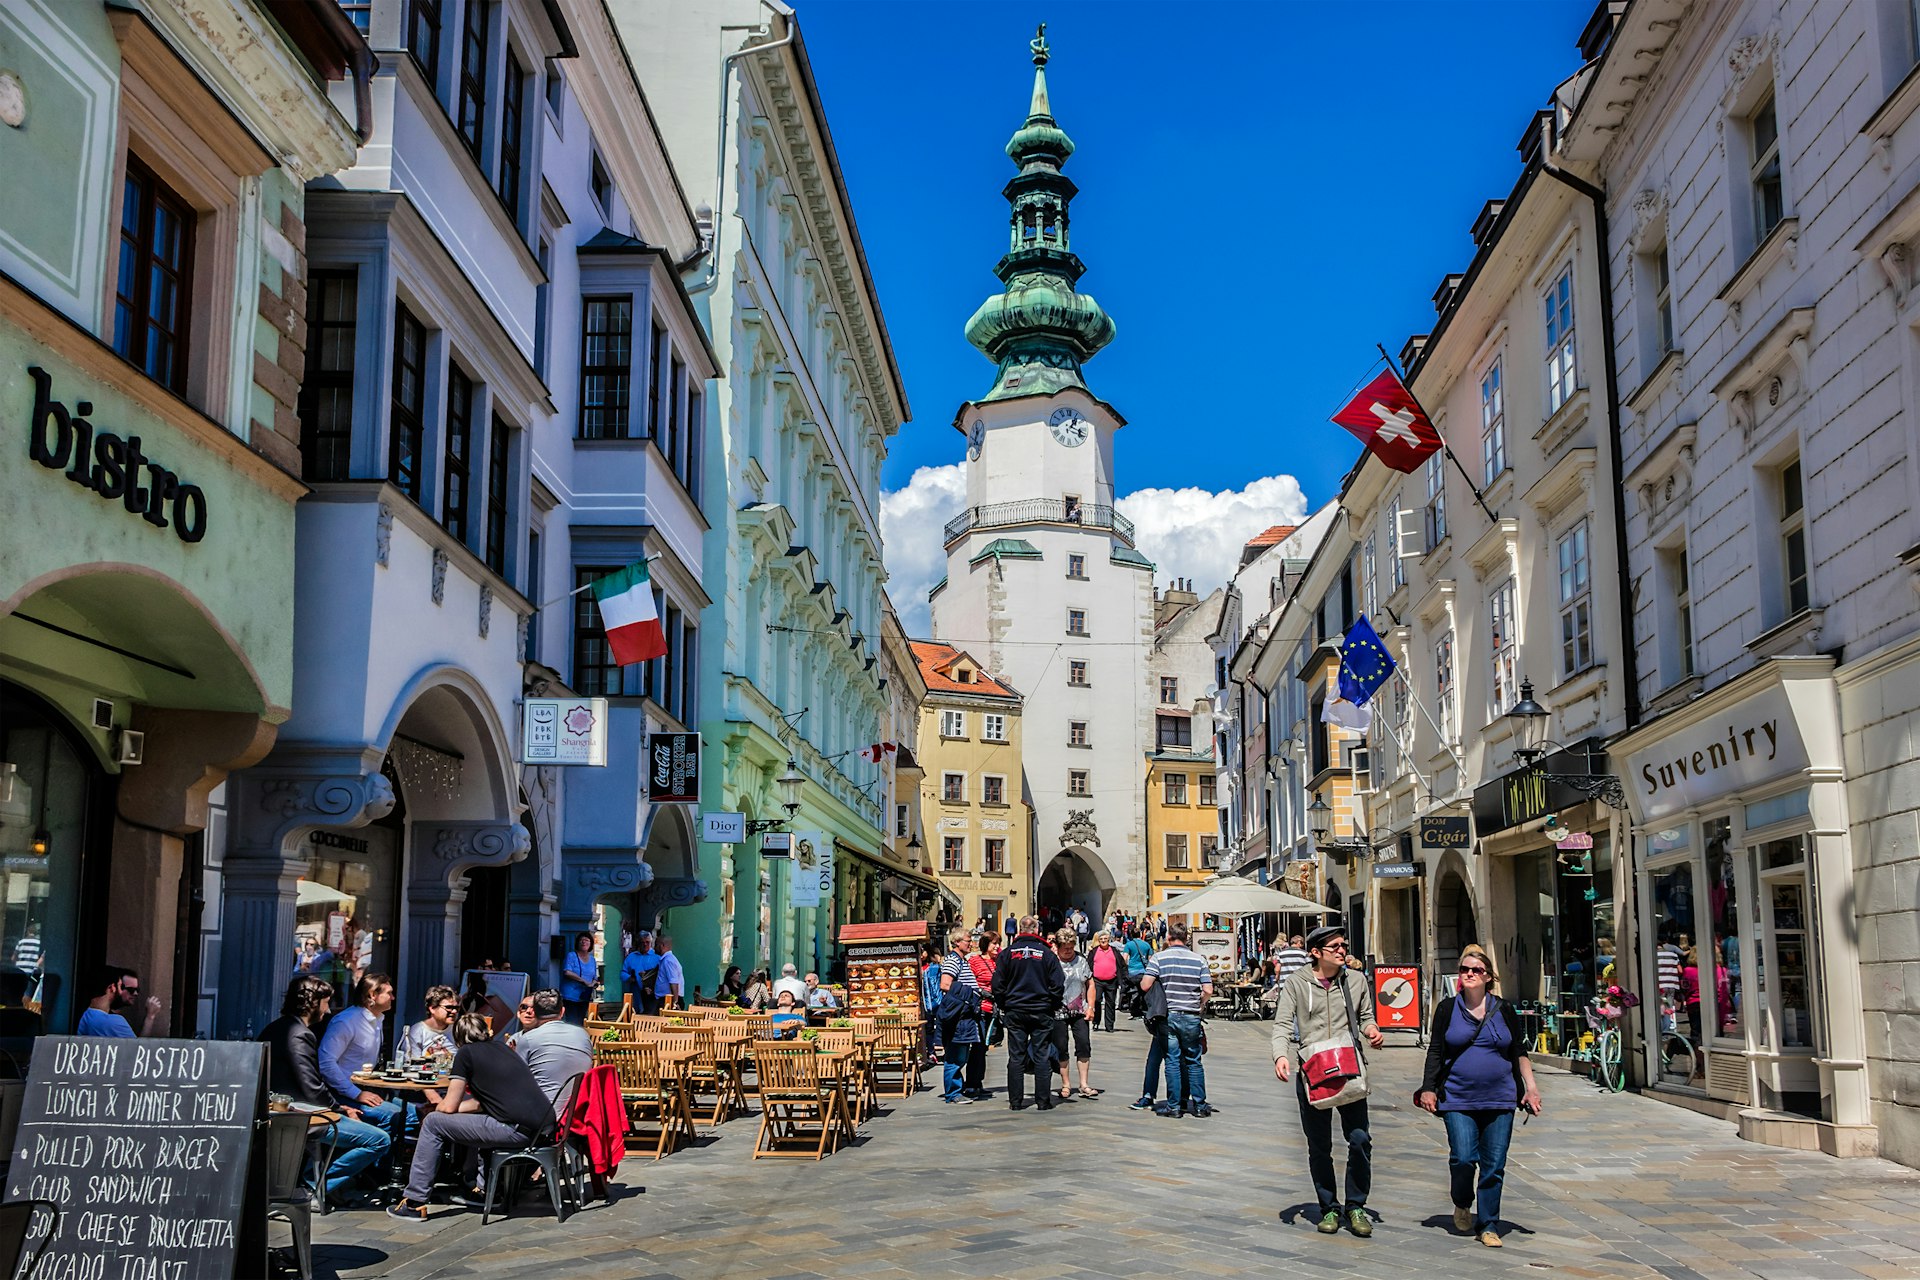 People walk down a street in the Old Town of Bratislava, Slovakia